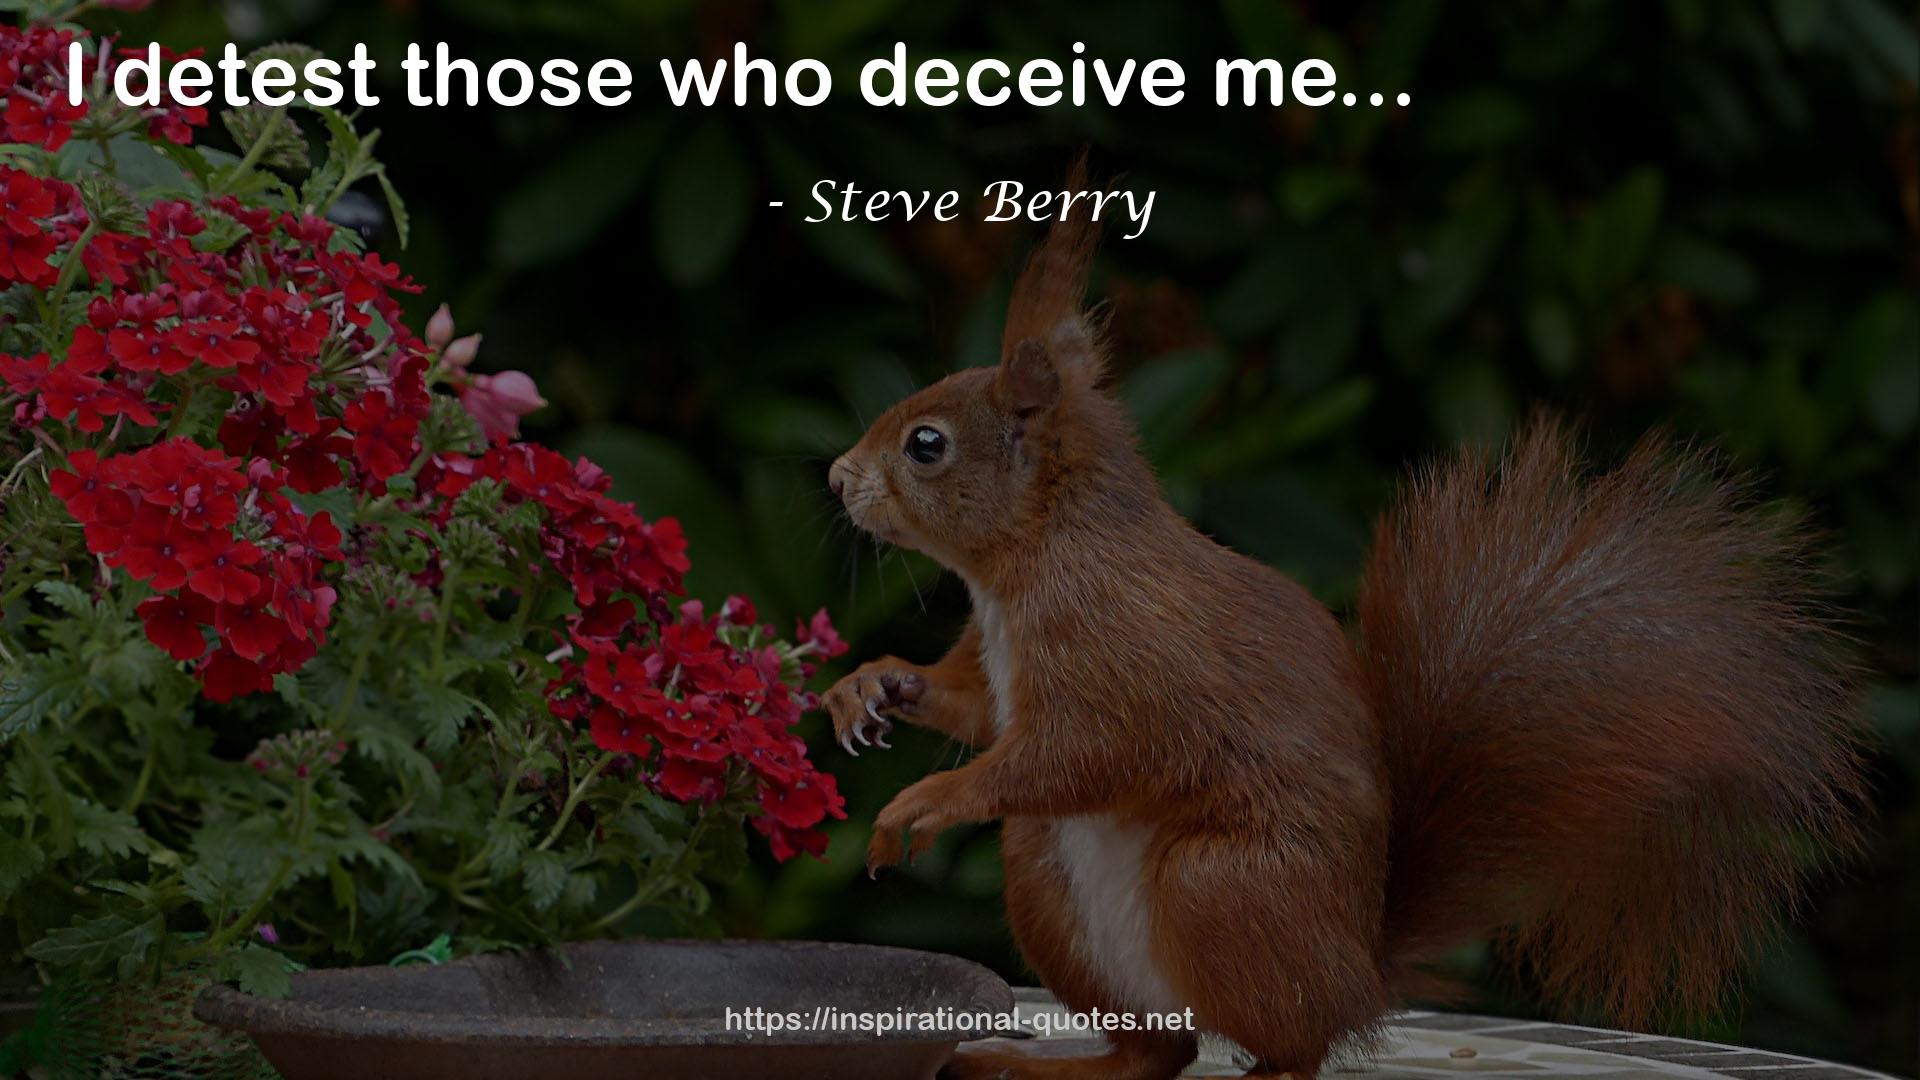 Steve Berry QUOTES